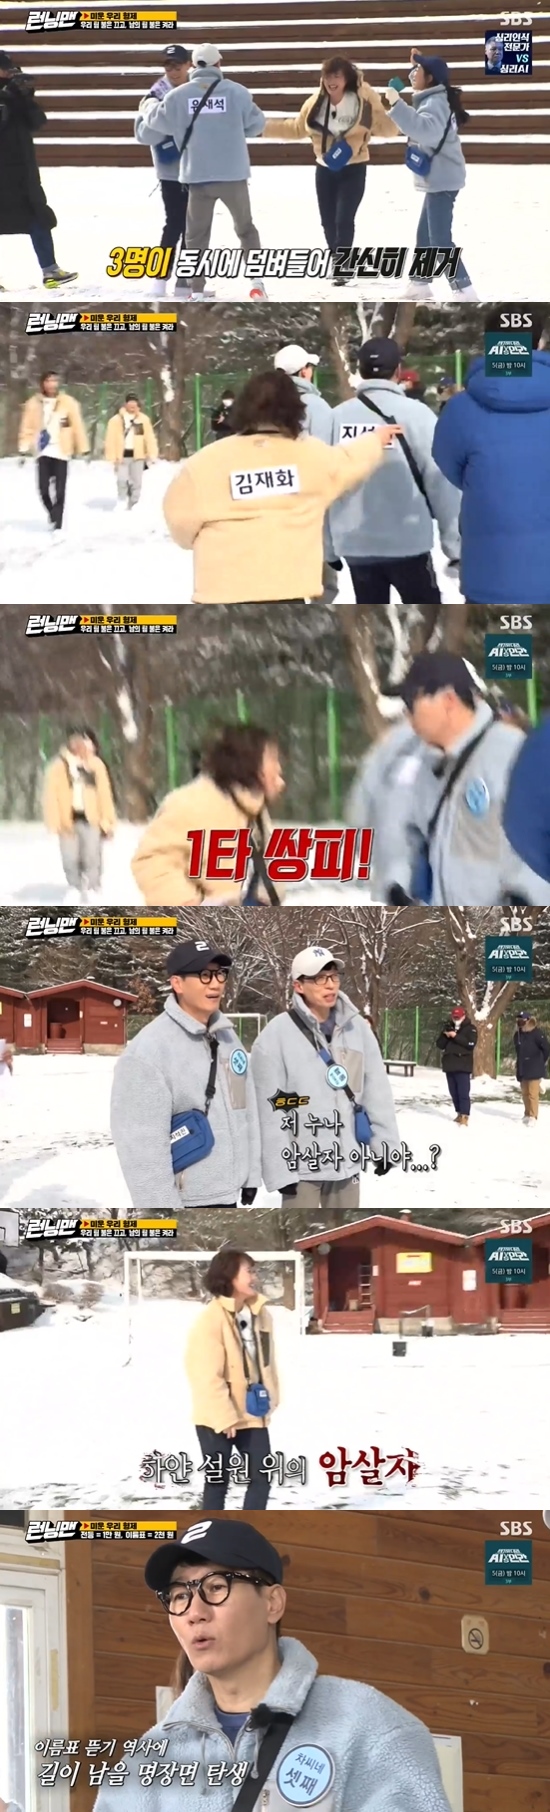 Running Man Kim Jae Hwa has become a name tag torn La scumouneOn the 31st broadcast SBS Good Sunday - Running Man, Shin Dong-mi, Kim Jae Hwa, and Cha Chung-hwa appeared and played our hateful brother Race.On this day, Kim Jae Hwa said, I was honestly surprised. Why me in Running Man?Kim Jae Hwa said, There is no issue now. Ji Suk-jin said, It is an issue that is now.Kim Jae Hwa then presented an animal sound personal period; members were surprised and laughed at the loud chicken sound and loud movements of Kim Jae Hwa.Kim Jae Hwa said that it should not be done if you are still, and said why you moved. Kim Jae Hwa can also make elephant sounds.Cha Chung-hwa backed off in surprise as Kim Jae Hwa made elephant noises.Kim Jae Hwa laughed at Kims sisters Lee Kwang-soo, Haha and poultry chefs every time he won the commission.Kim Jae Hwa, who was enthusiastically missioning, surprised everyone with his extraordinary ability in the name tag-rapping mission.Ji Suk-jin and Yoo Jae-Suk approached to rip off Kim Jae Hwas name tag, but Kim Jae Hwa rather faced Ji Suk-jin one-on-one to remove Ji Suk-jins name tag.Ji Suk-jin even claps in embarrassment.Yoo Jae-Suk also faced Kim Jae Hwa with Cha Chung Hwa, but Kim Jae Hwa also escaped and removed Cha Chung Hwa Name tag.Three people rushed in and barely ripped Kim Jae Hwas name tag, but soon Kim Jae Hwa gave a spectacular scene to tear Yoo Jae-Suk and Ji Suk-jin Name tags in succession.Yoo Jae-Suk was surprised that is not that sister La scoomoune and Ji Suk-jin said woman Kim Jong-kook and tongued out that she was much better than them.Yang Se-chan even says, I cant see my feet, Im a cooper.The results of the Name tag tearing after the race ended were revealed: the first was Kim Jong-kook, who removed the 11th name tag; the second was Kim Jae Hwa.Kim Jae Hwa, who beat the Running Man members, tore the name tag eight times.Ji Suk-jin said, There is a great scene in the history of 10 years of name tag tearing. Among the staff, it is called a twin sister.Yoo Jae-Suk said, I just stood and thought it was the top of the mountain. I know when I laugh, I feel Hyunjin at first glance.But Kim Jae Hwa combined with Team Mission and was penalised with Ji Suk-jin and Haha.Photo = SBS Broadcasting Screen